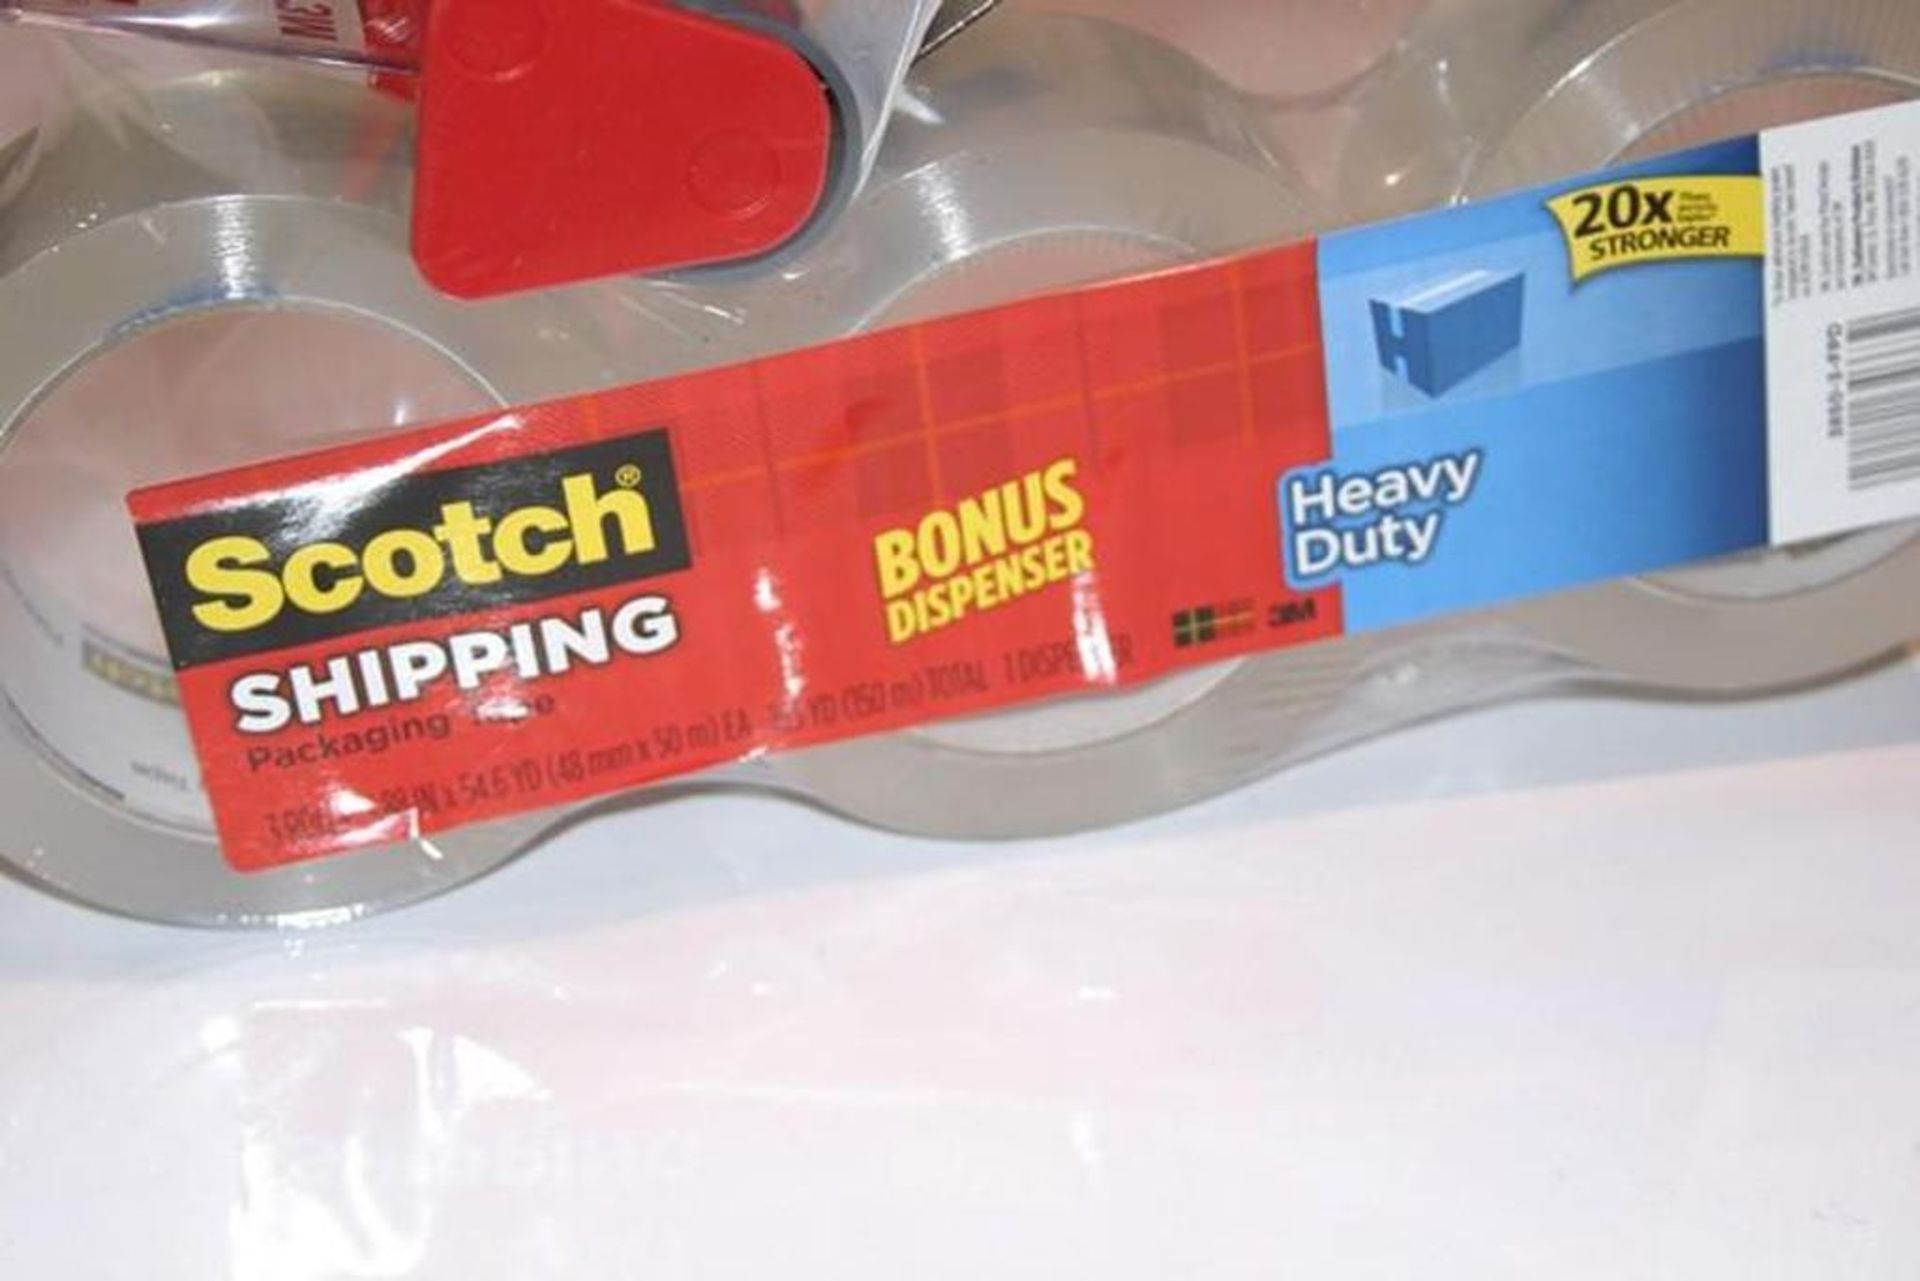 [2] NEW 3M SCOTCH Heavy Duty Shipping Packing Tape (2 Dispensers & 6 Tap Rolls) - Image 2 of 2